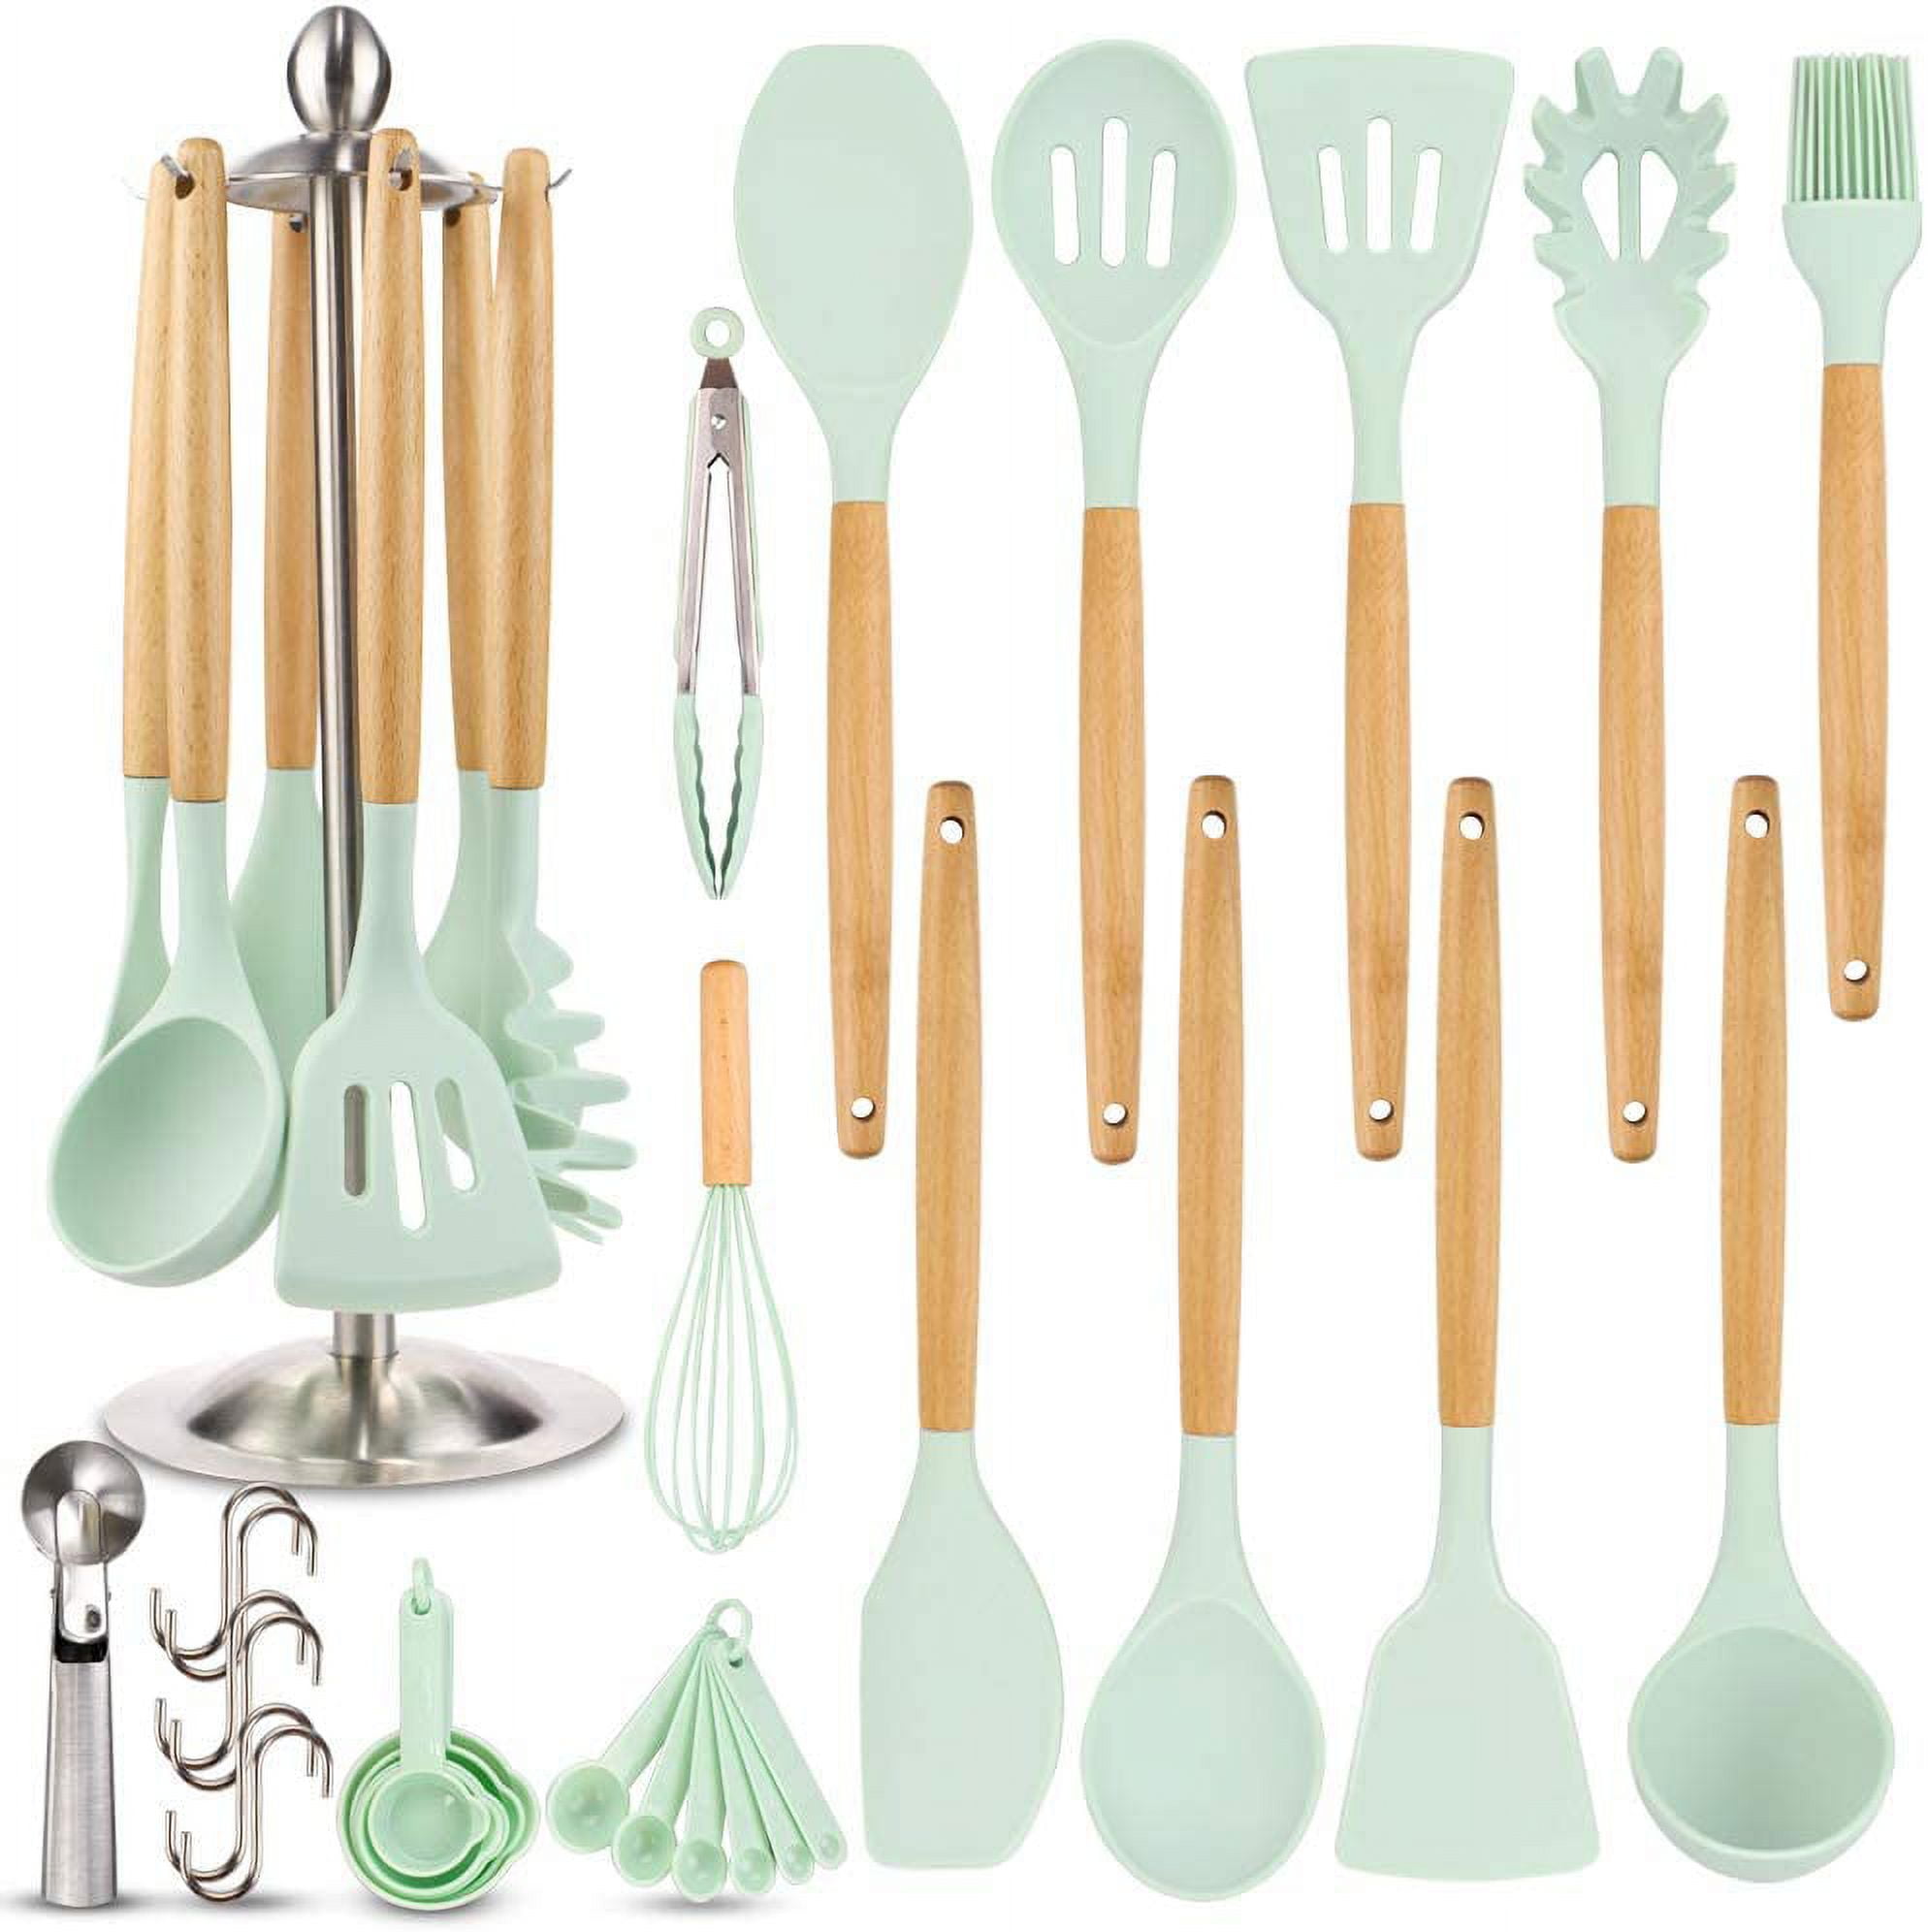 Silicone Kitchen Cooking Utensil Set, EAGMAK 16PCS Kitchen Utensils Spatula  Set with Stainless Steel Stand for Nonstick Cookware, BPA Free Non-Toxic  Cooking Ute…